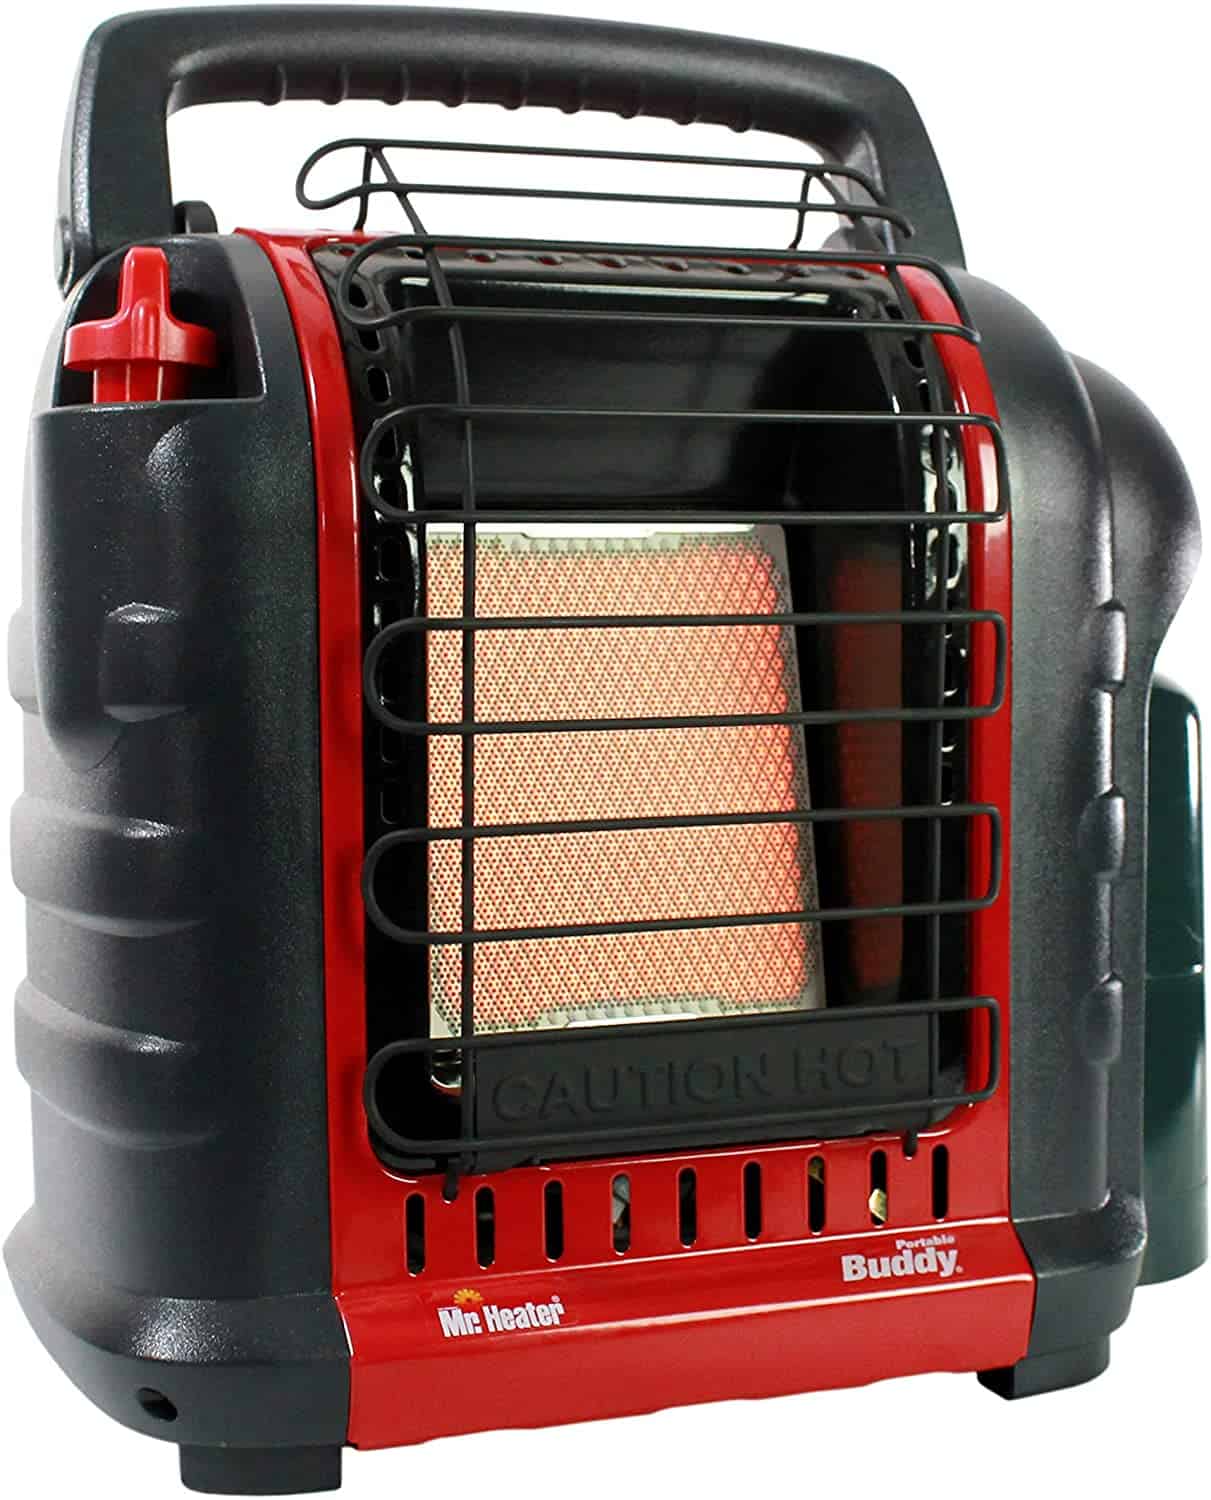 battery powered heater for camping